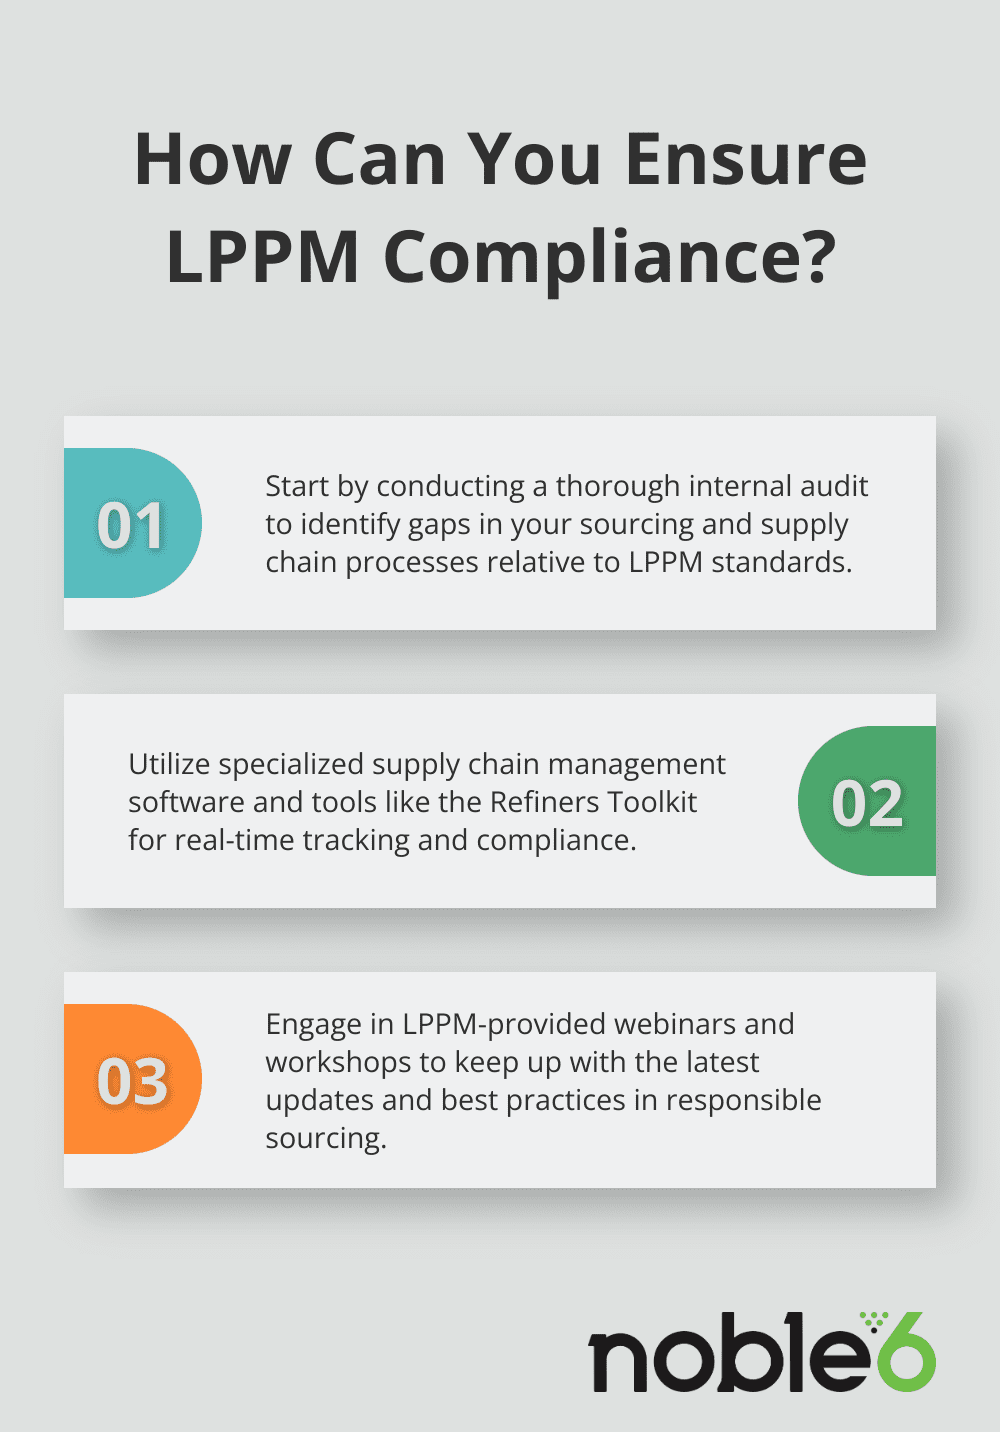 Fact - How Can You Ensure LPPM Compliance?